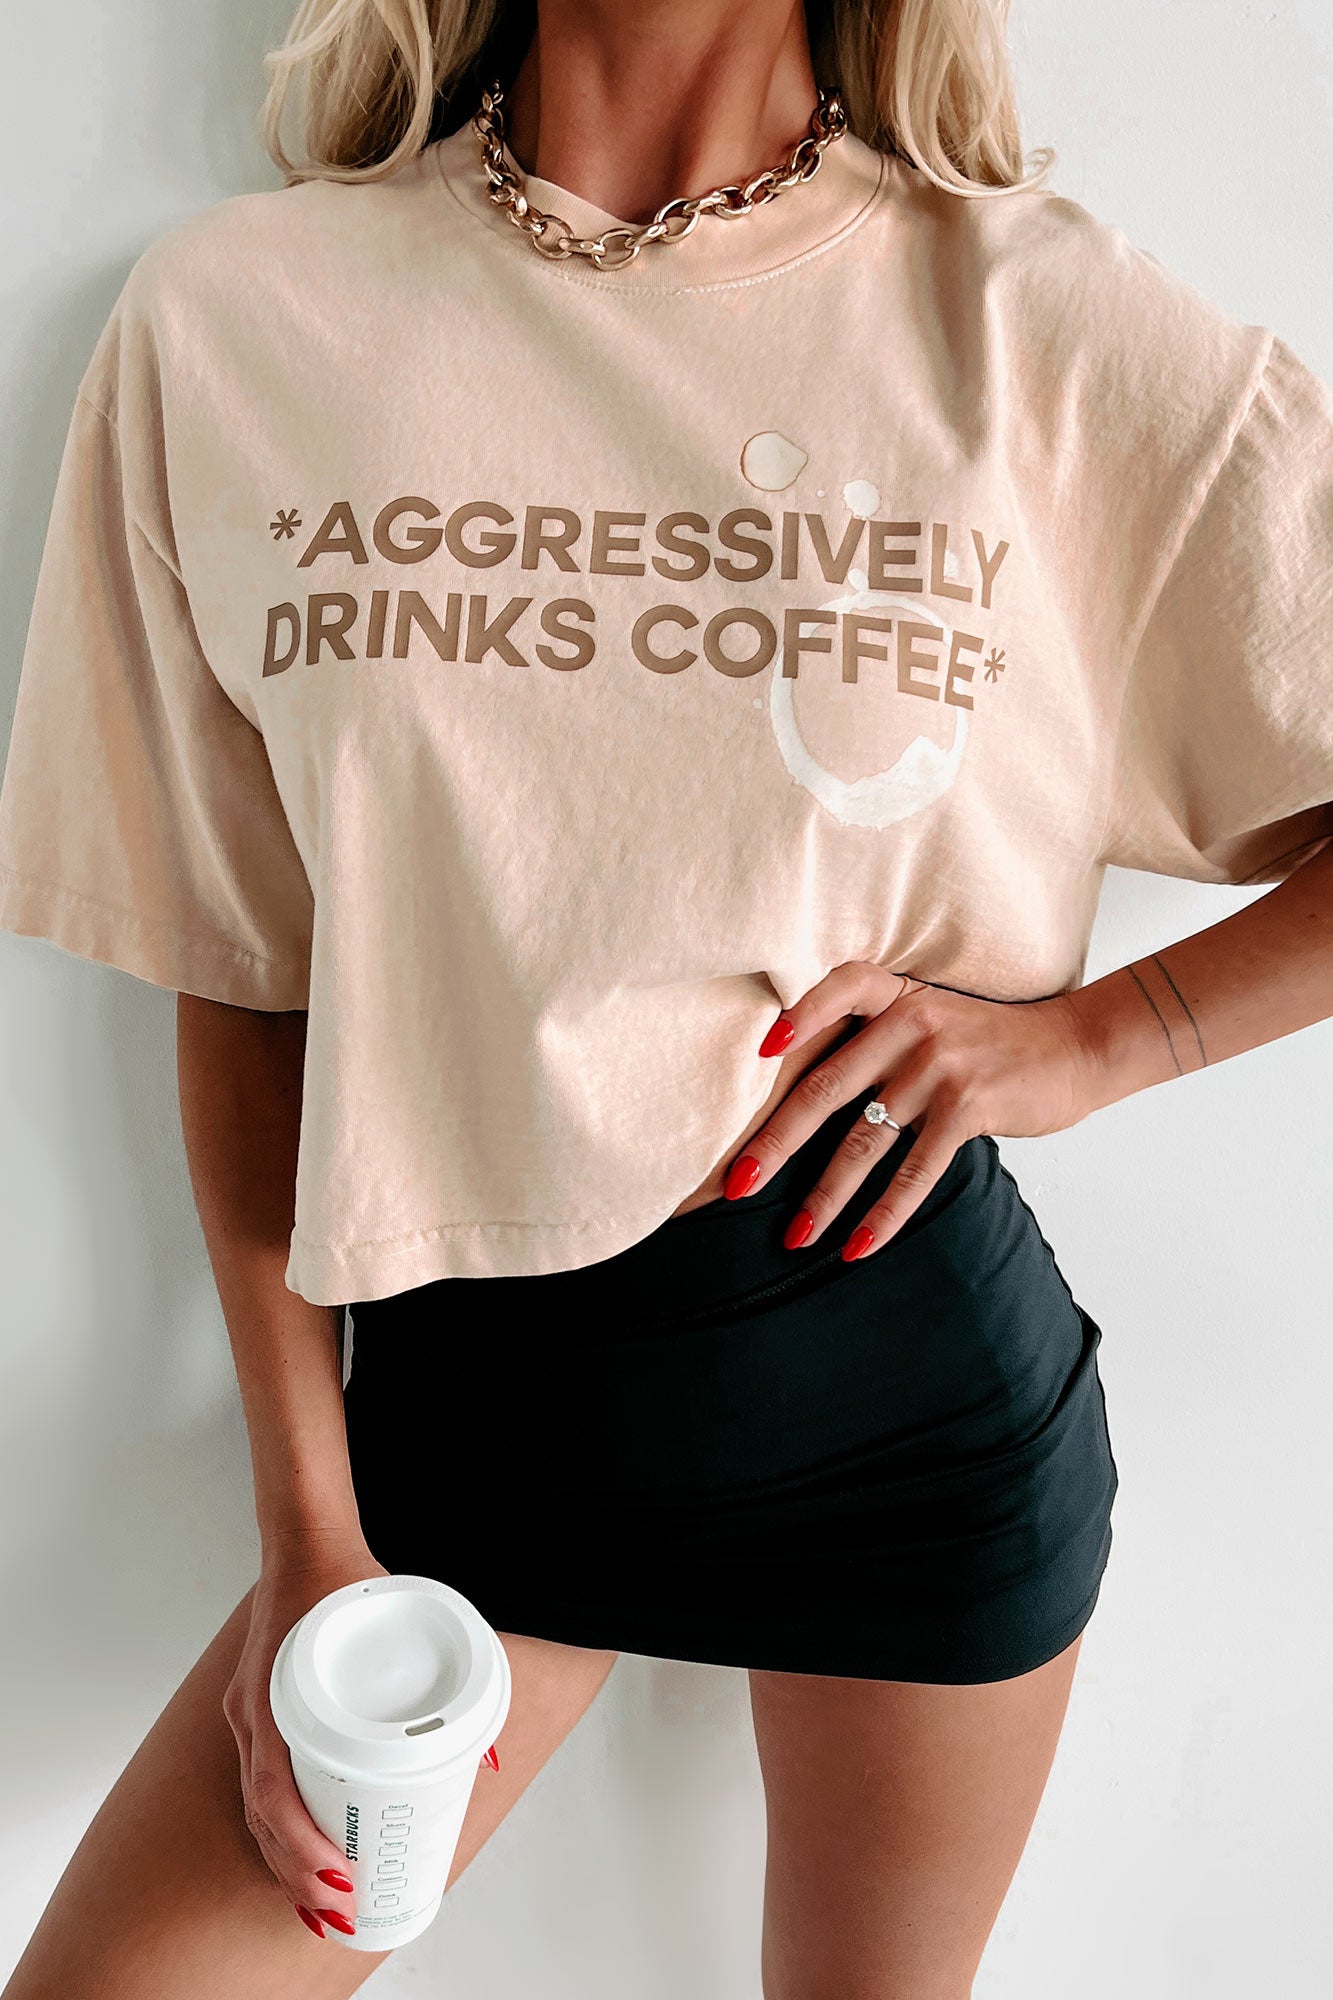 Doorbuster "Aggressively Drinks Coffee" Boxy Fit Graphic Crop Tee (Beige) - Print On Demand - NanaMacs